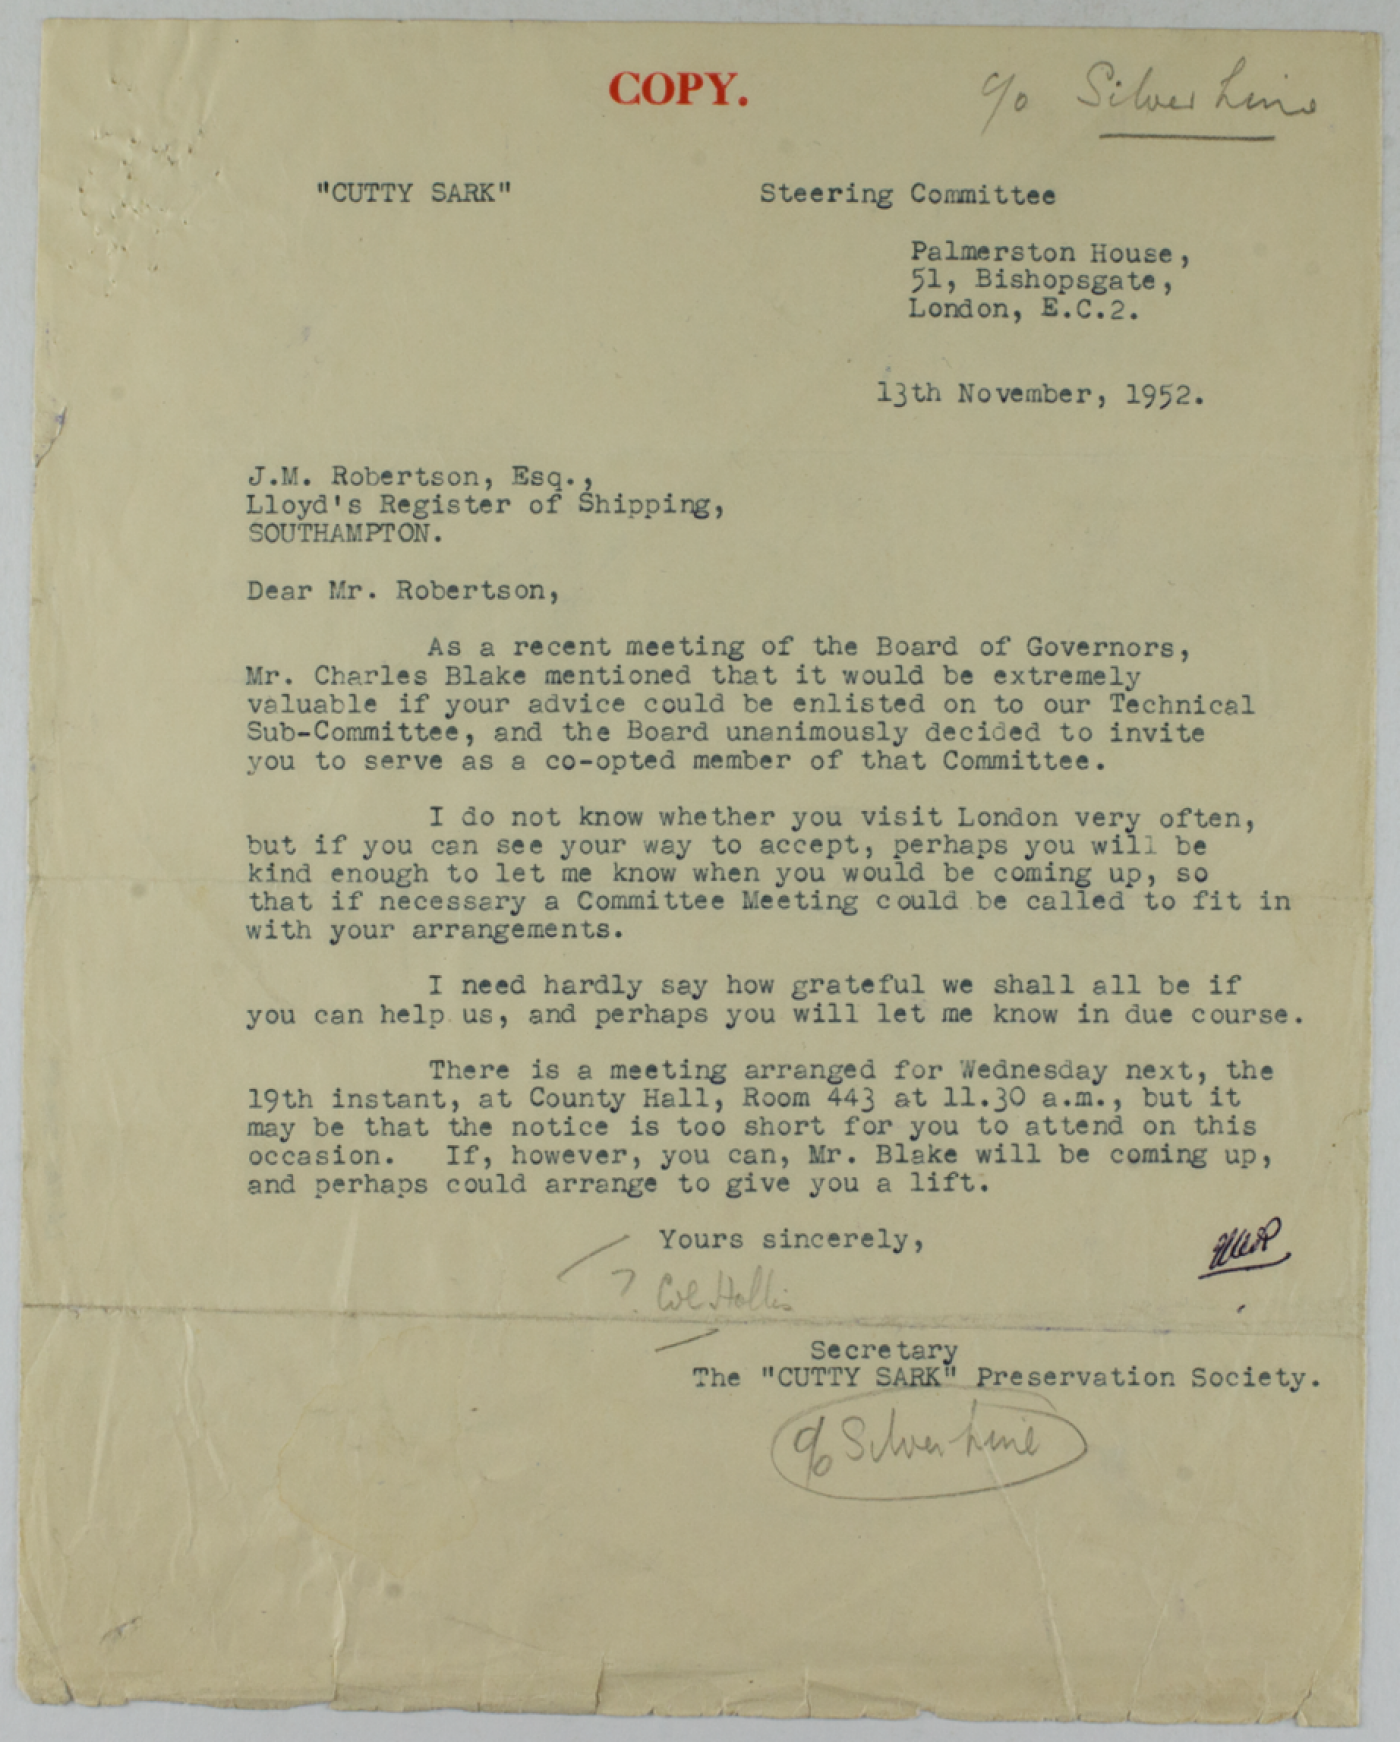 letter from the Secretary of the Cutty Sark Preservation Society